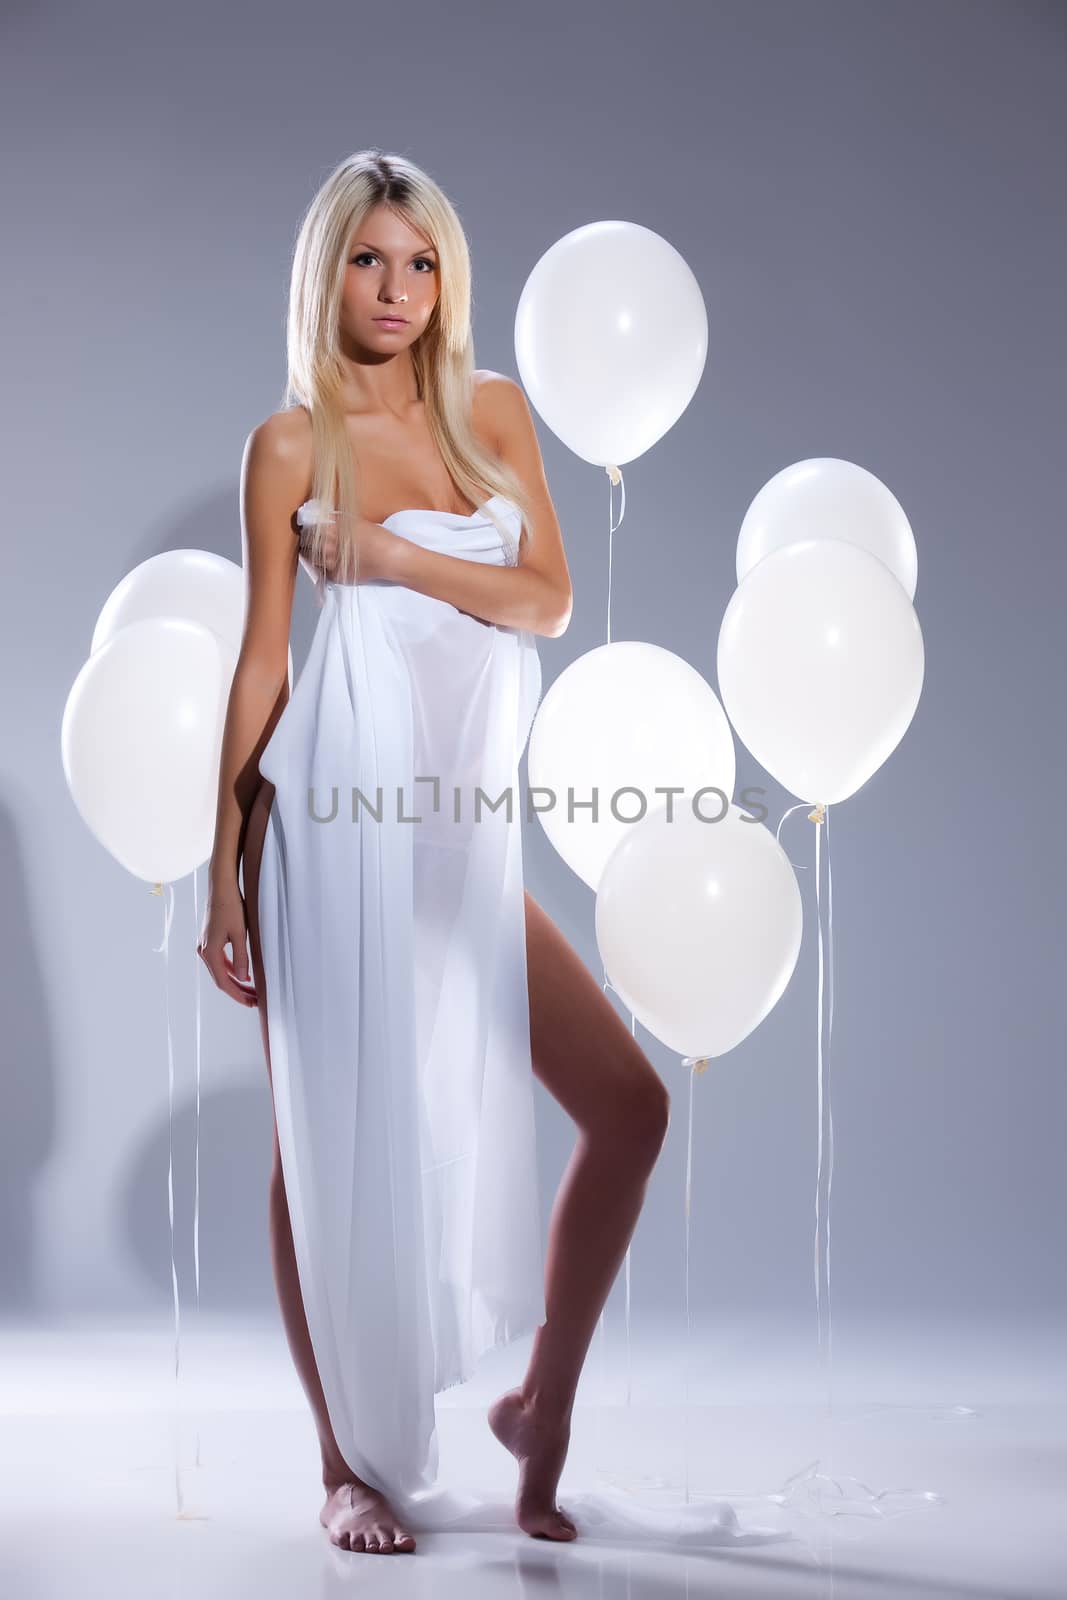 Young Woman With Balloons by Fotoskat